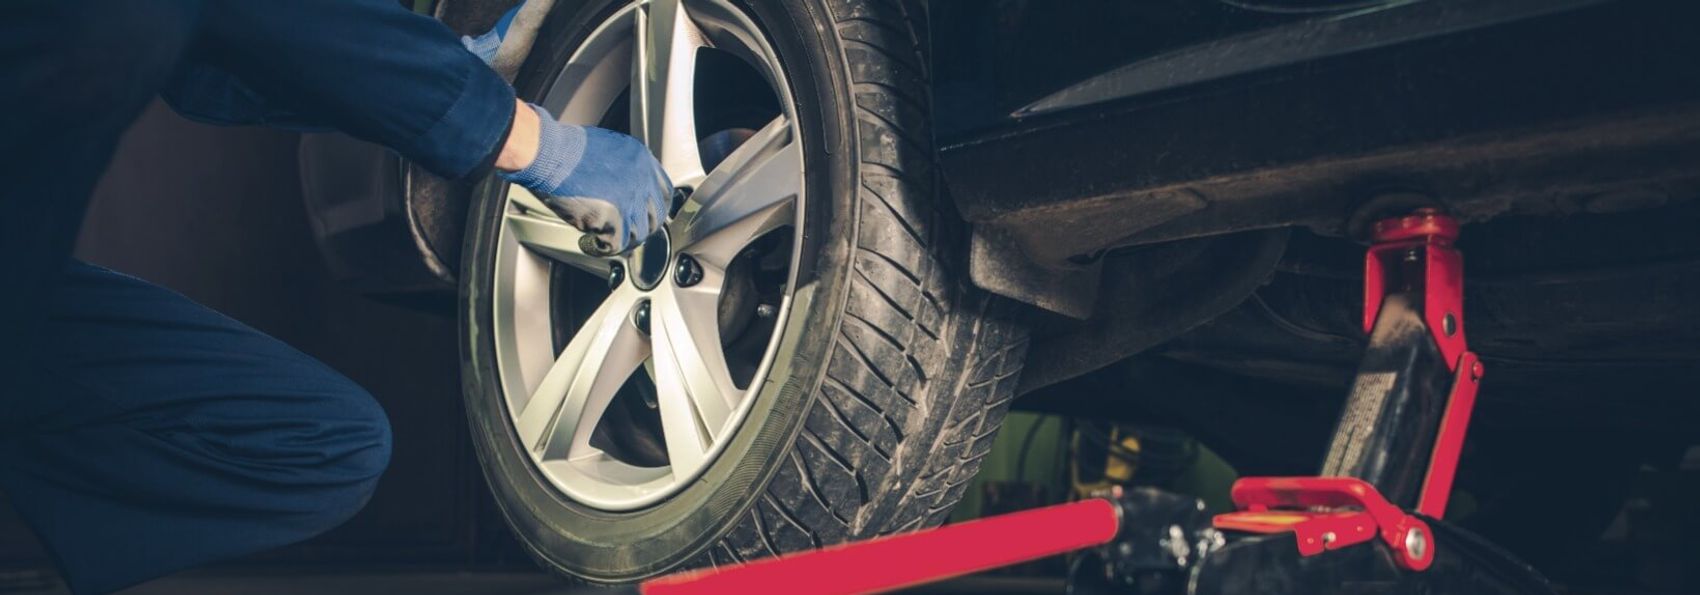 Our tire center is here to help!